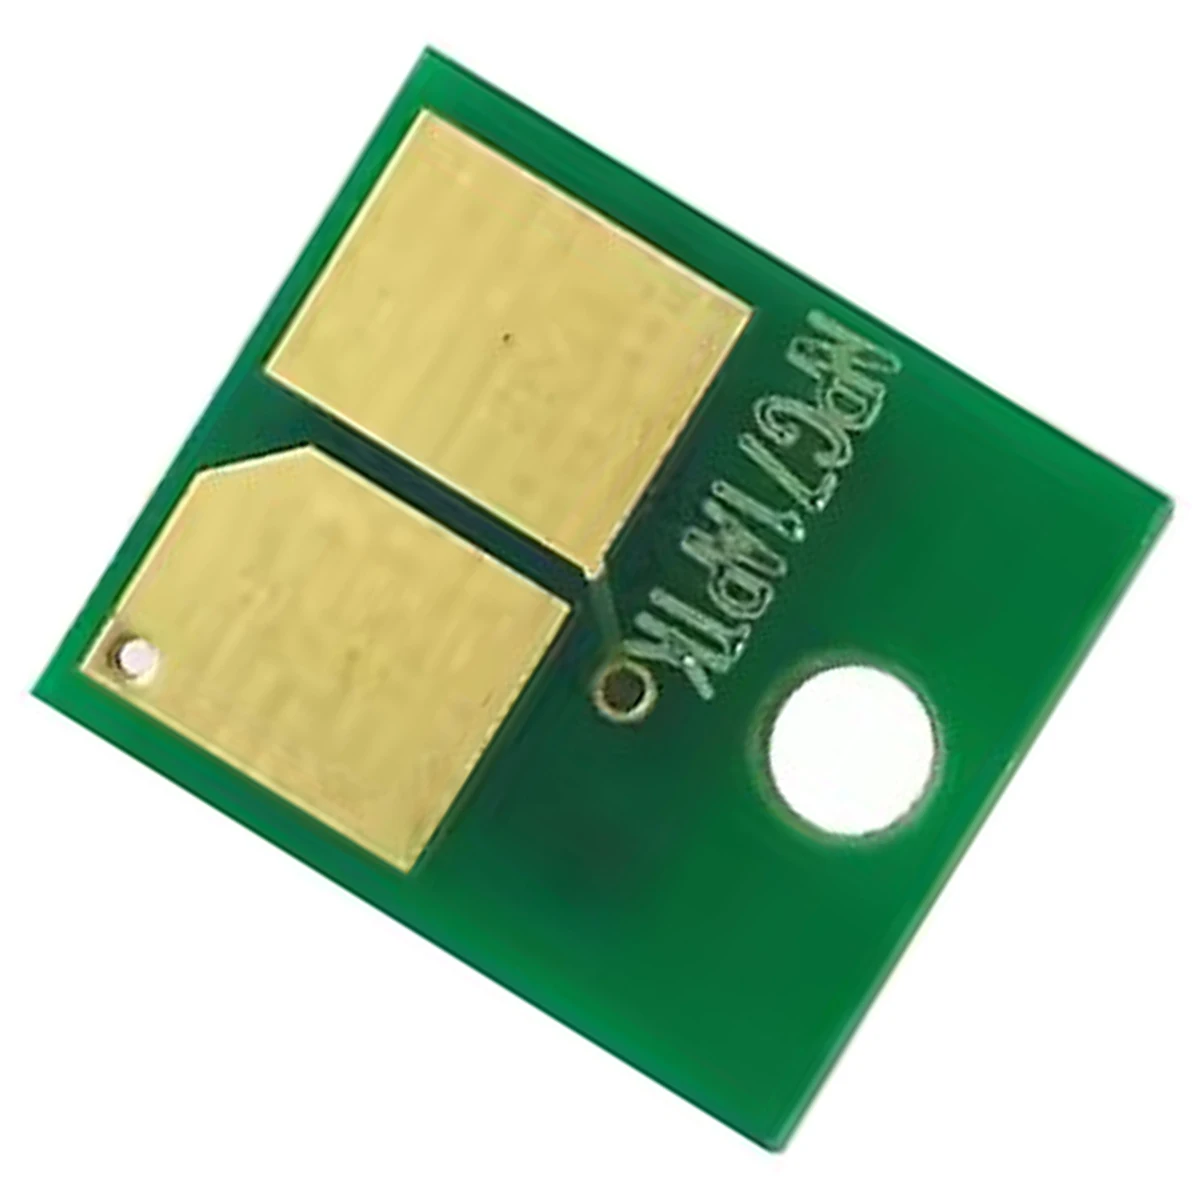 

Photoconductor Image Imaging Unit Drum Chip FOR Canon IR ImageRunner Advance DX DX 6870 iMFP DX 6855 i MFP DX 6860 i MFP